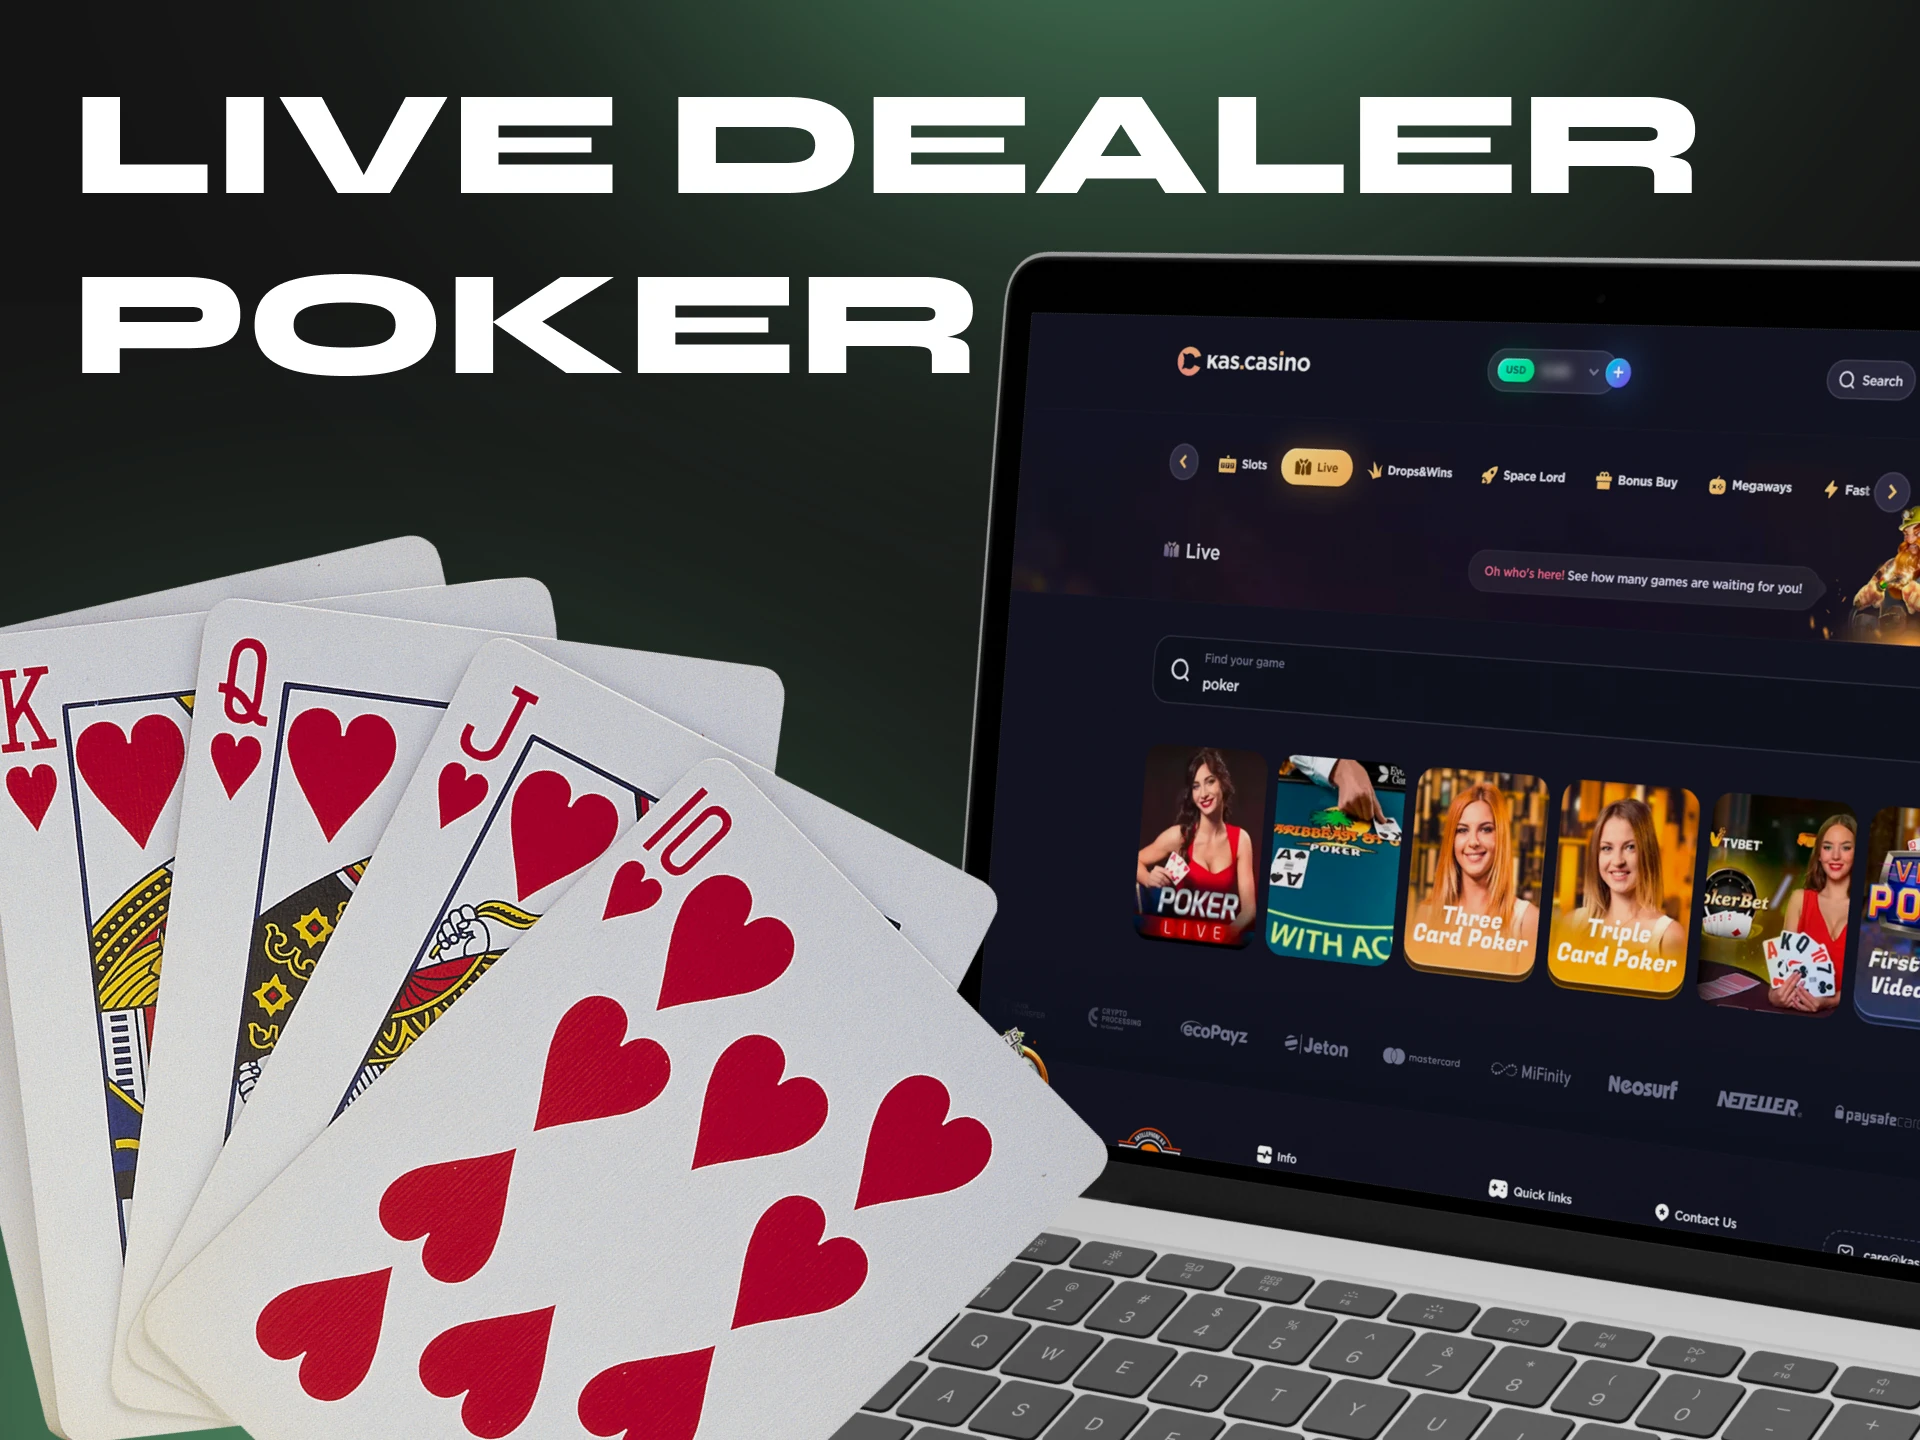 Try playing poker with a live dealer in a crypto casino.